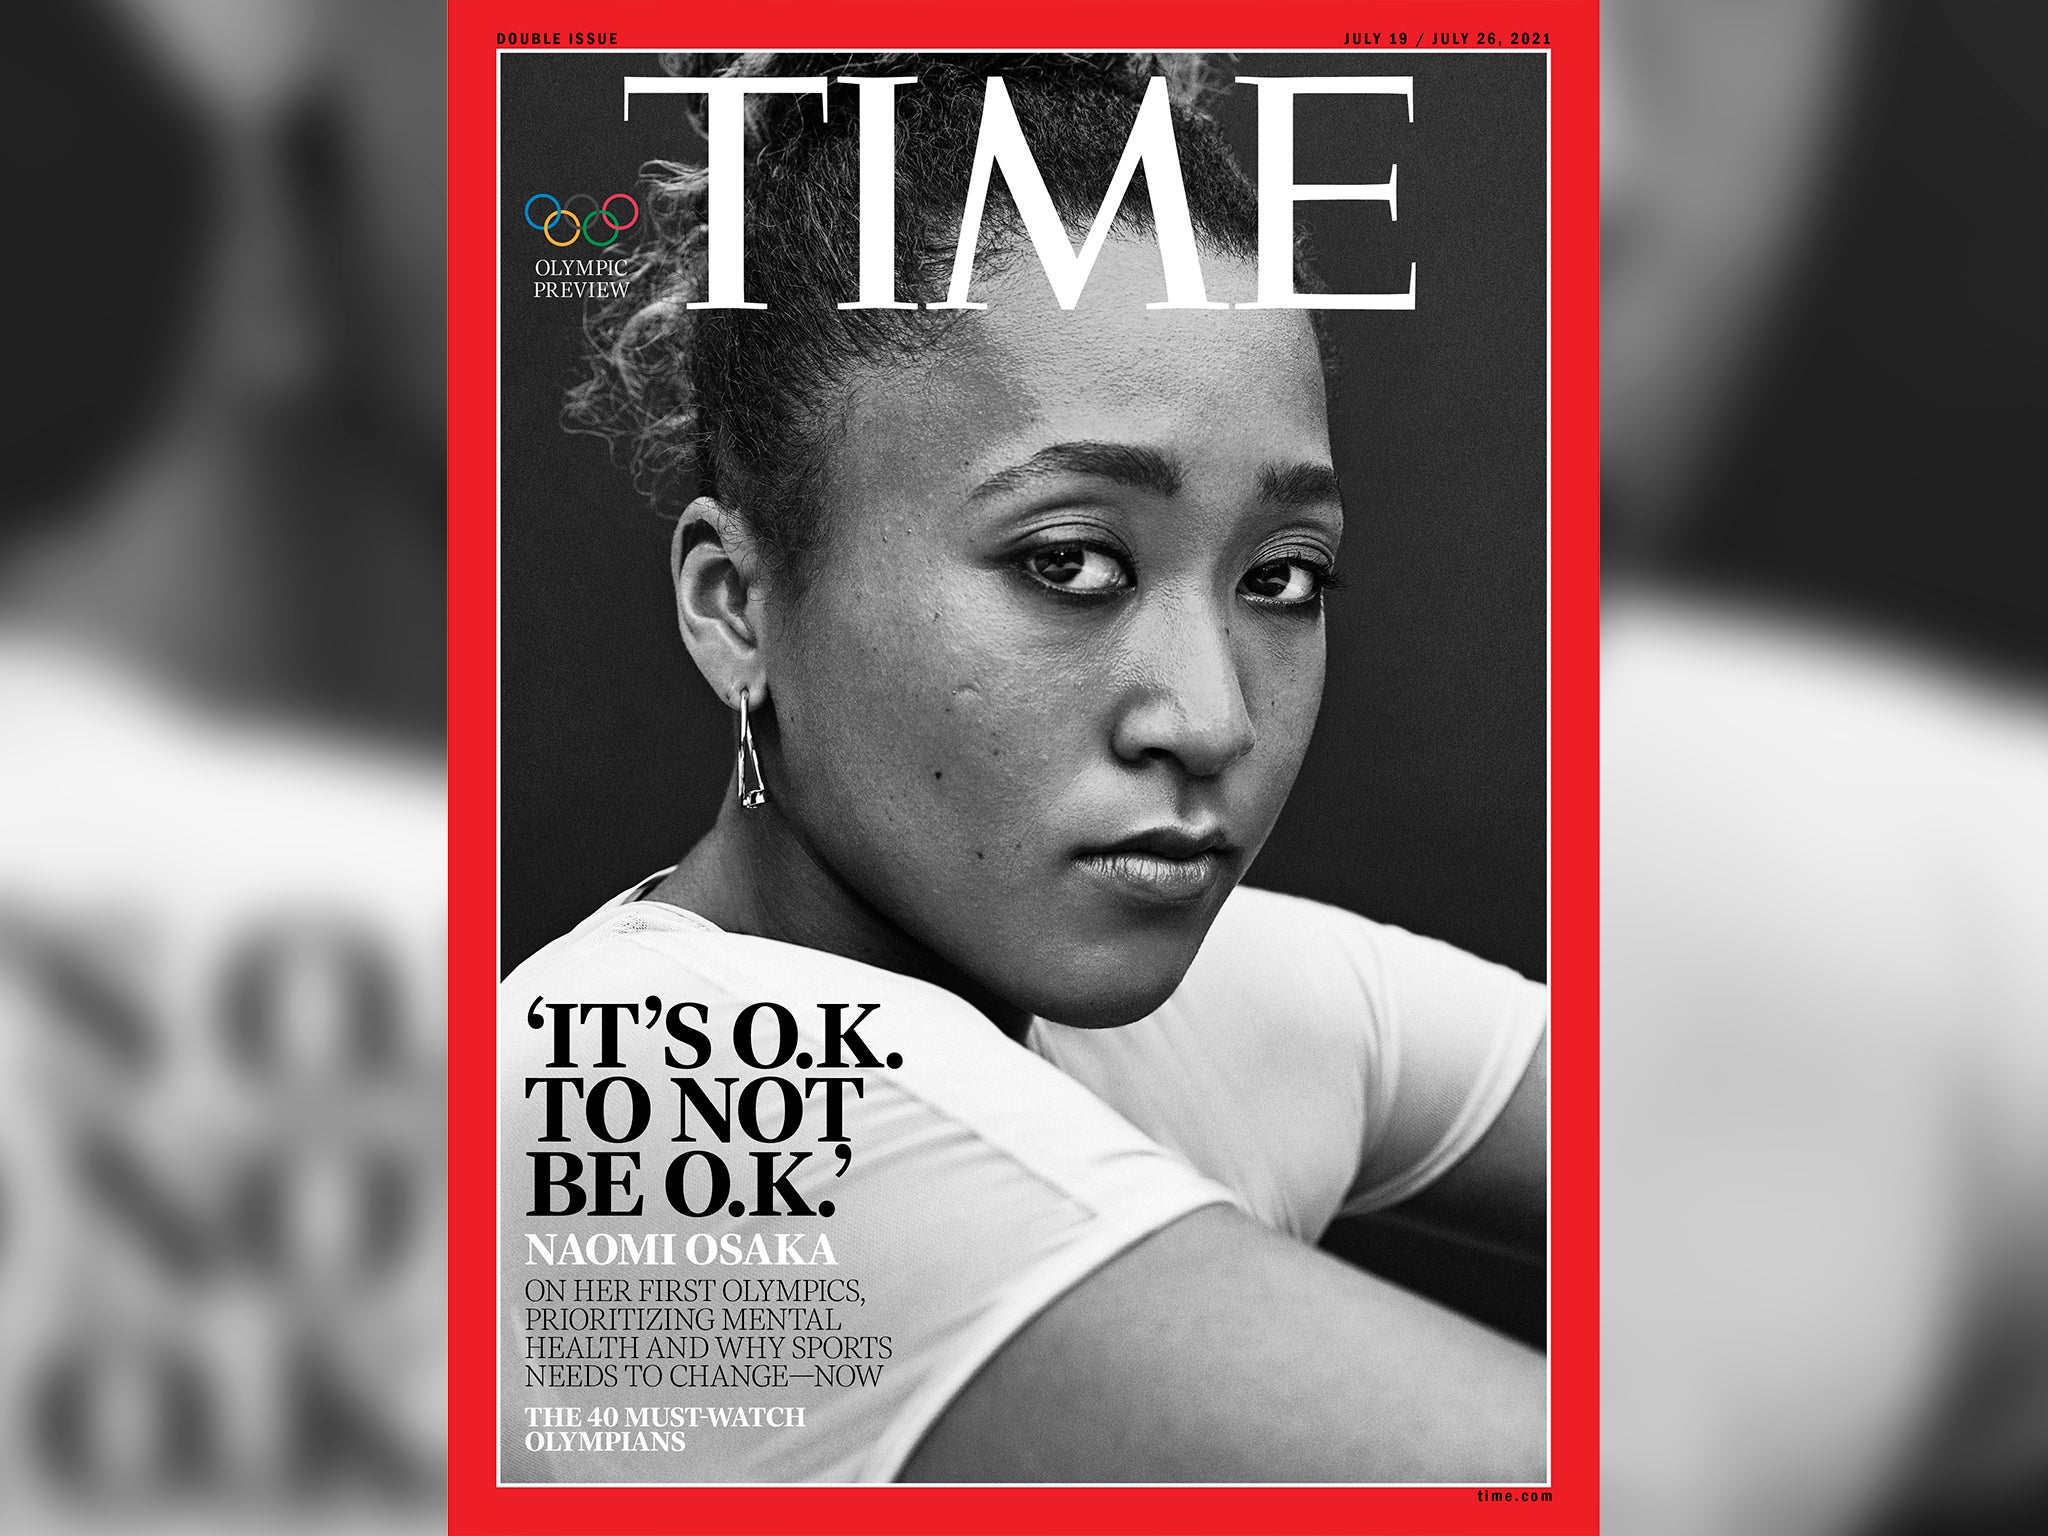 Naomi Osaka is on the cover of the latest issue of TIME and wrote a personal essay for the magazine about her mental health